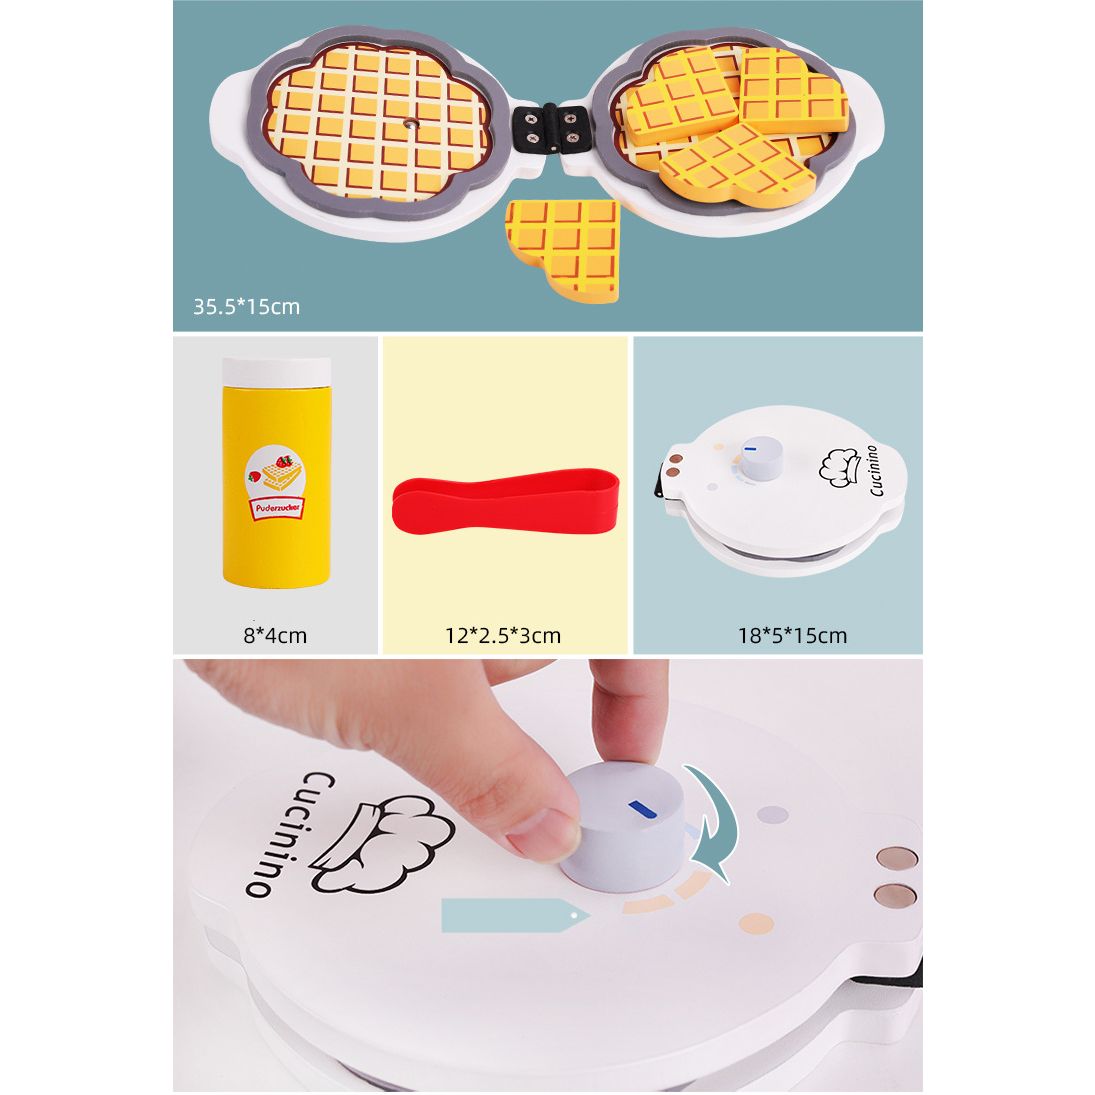 Wooden Waffle Maker. Pretend Play Set. Wooden Kitchen Food Toy.